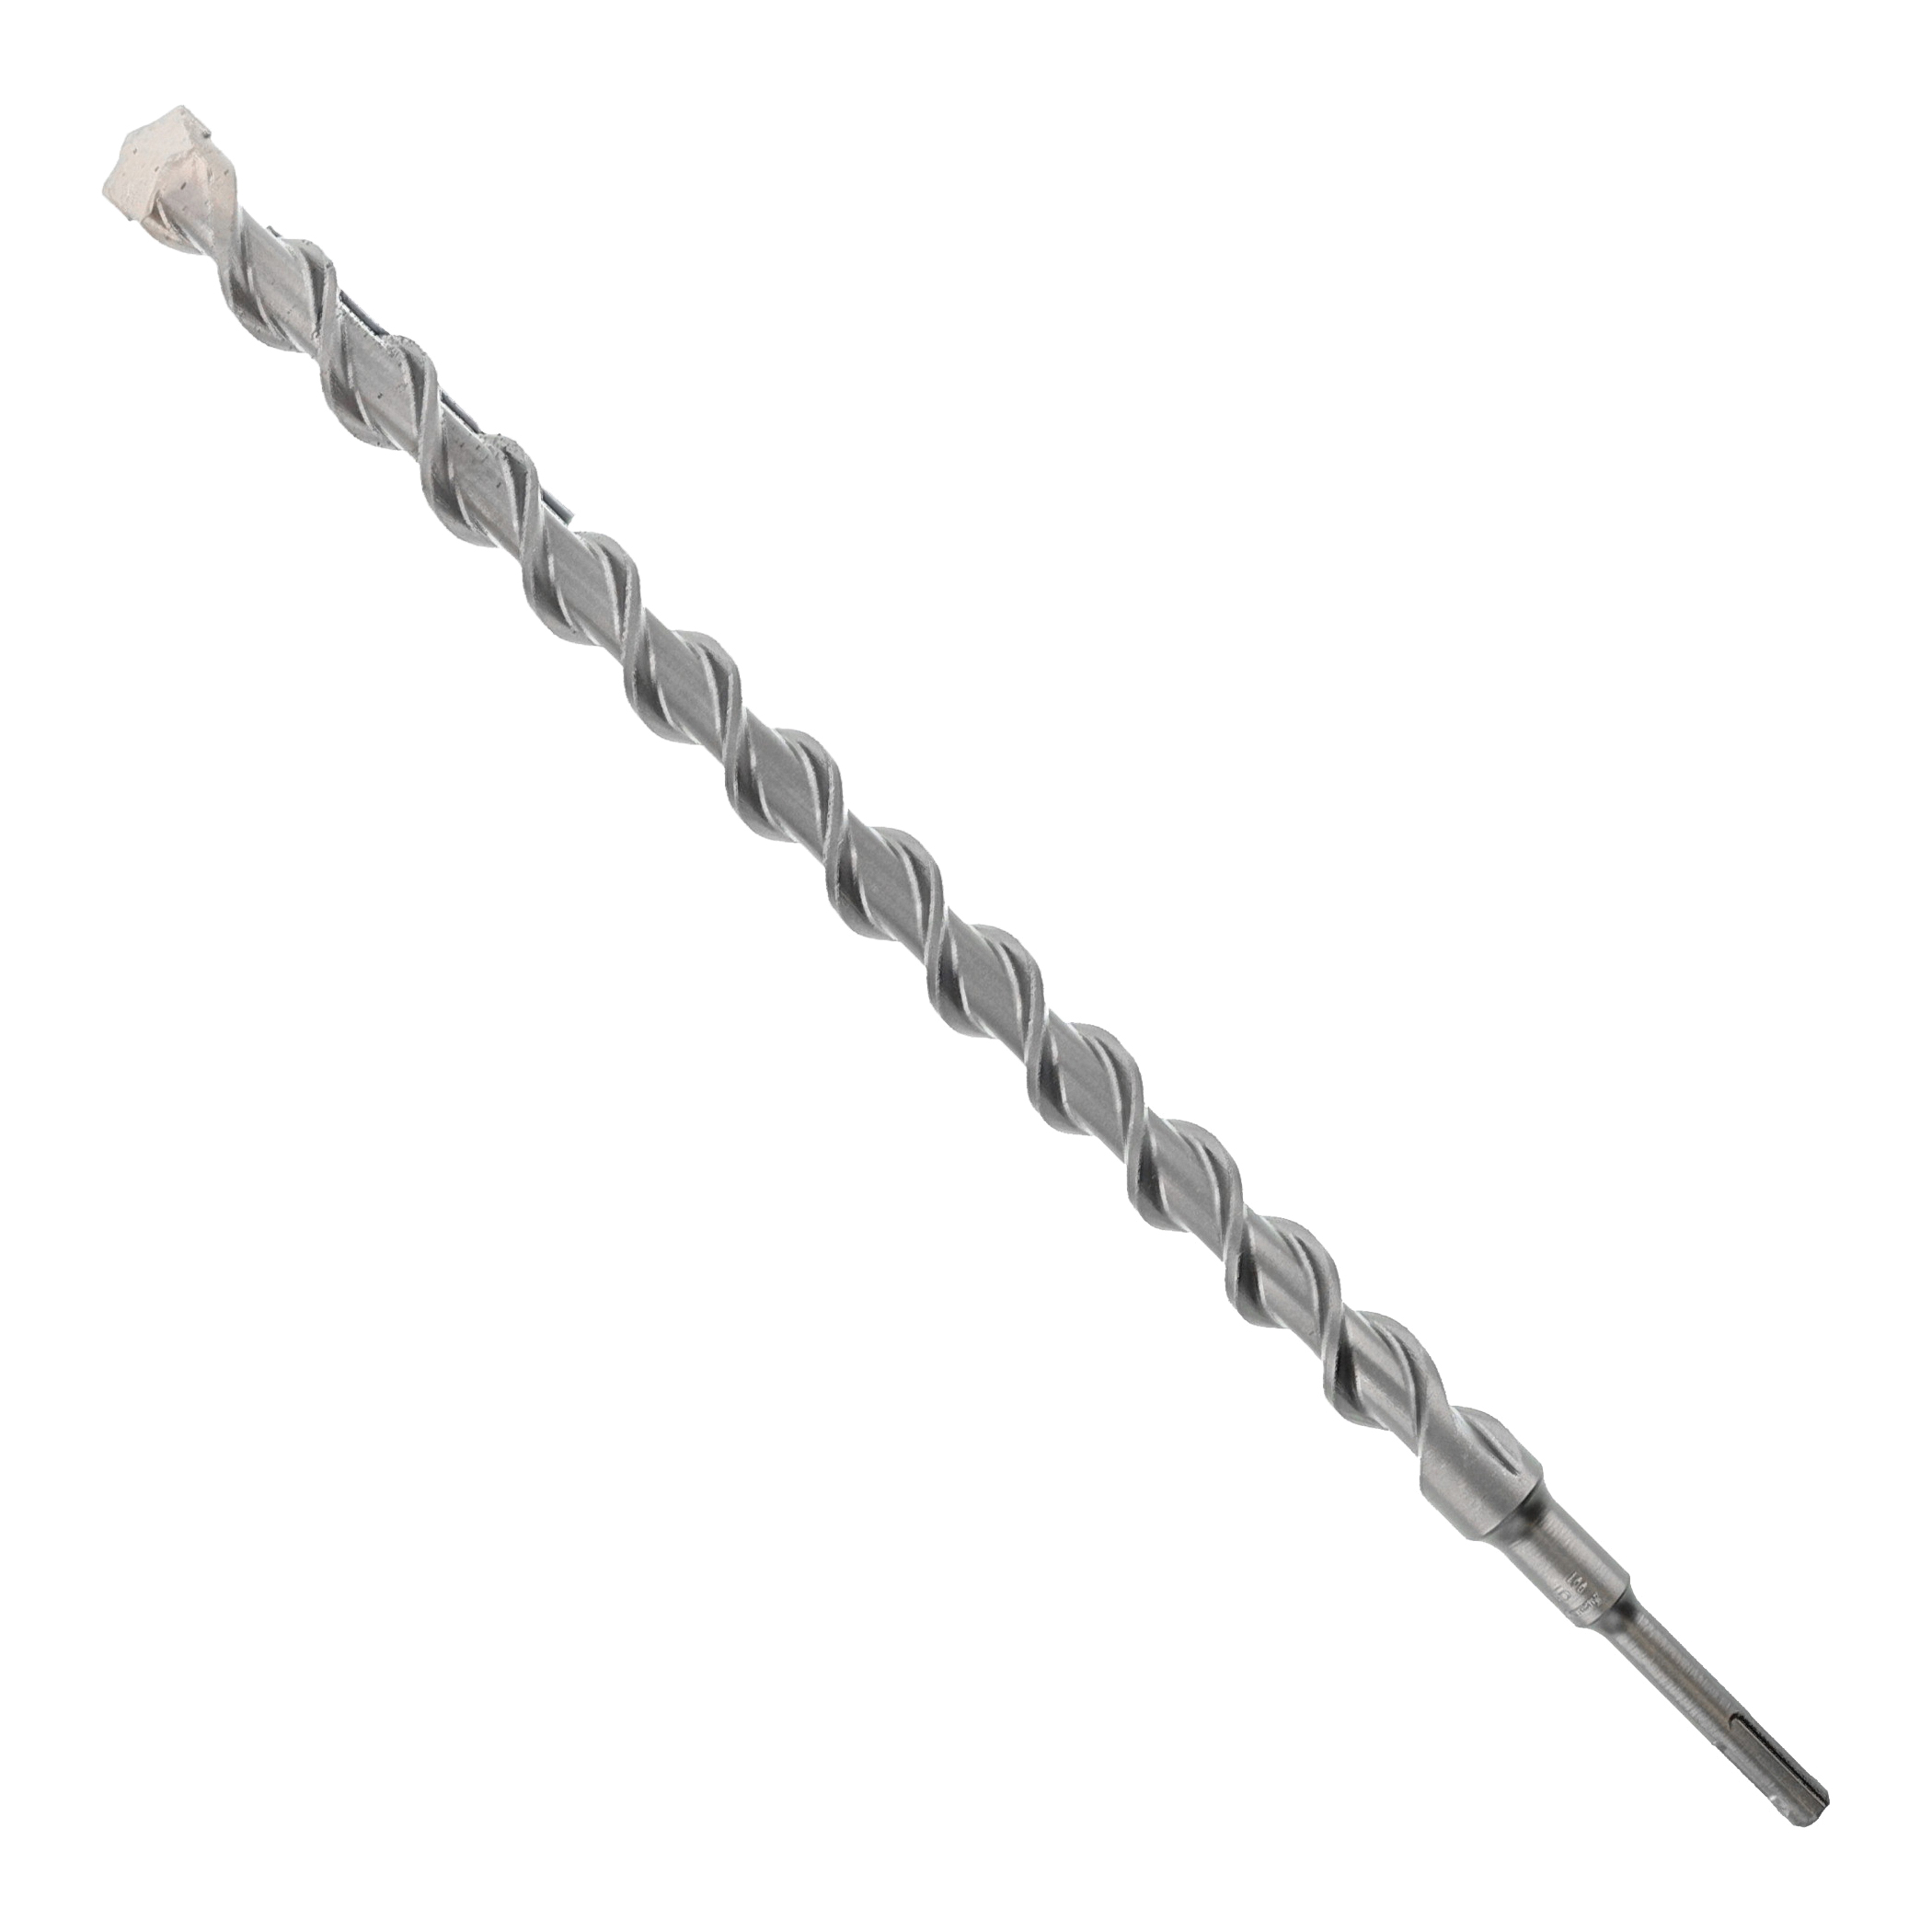 DMAPL2510 Hammer Drill Bit, 7/8 in Dia, 18 in OAL, Percussion, 4-Flute, SDS Plus Shank